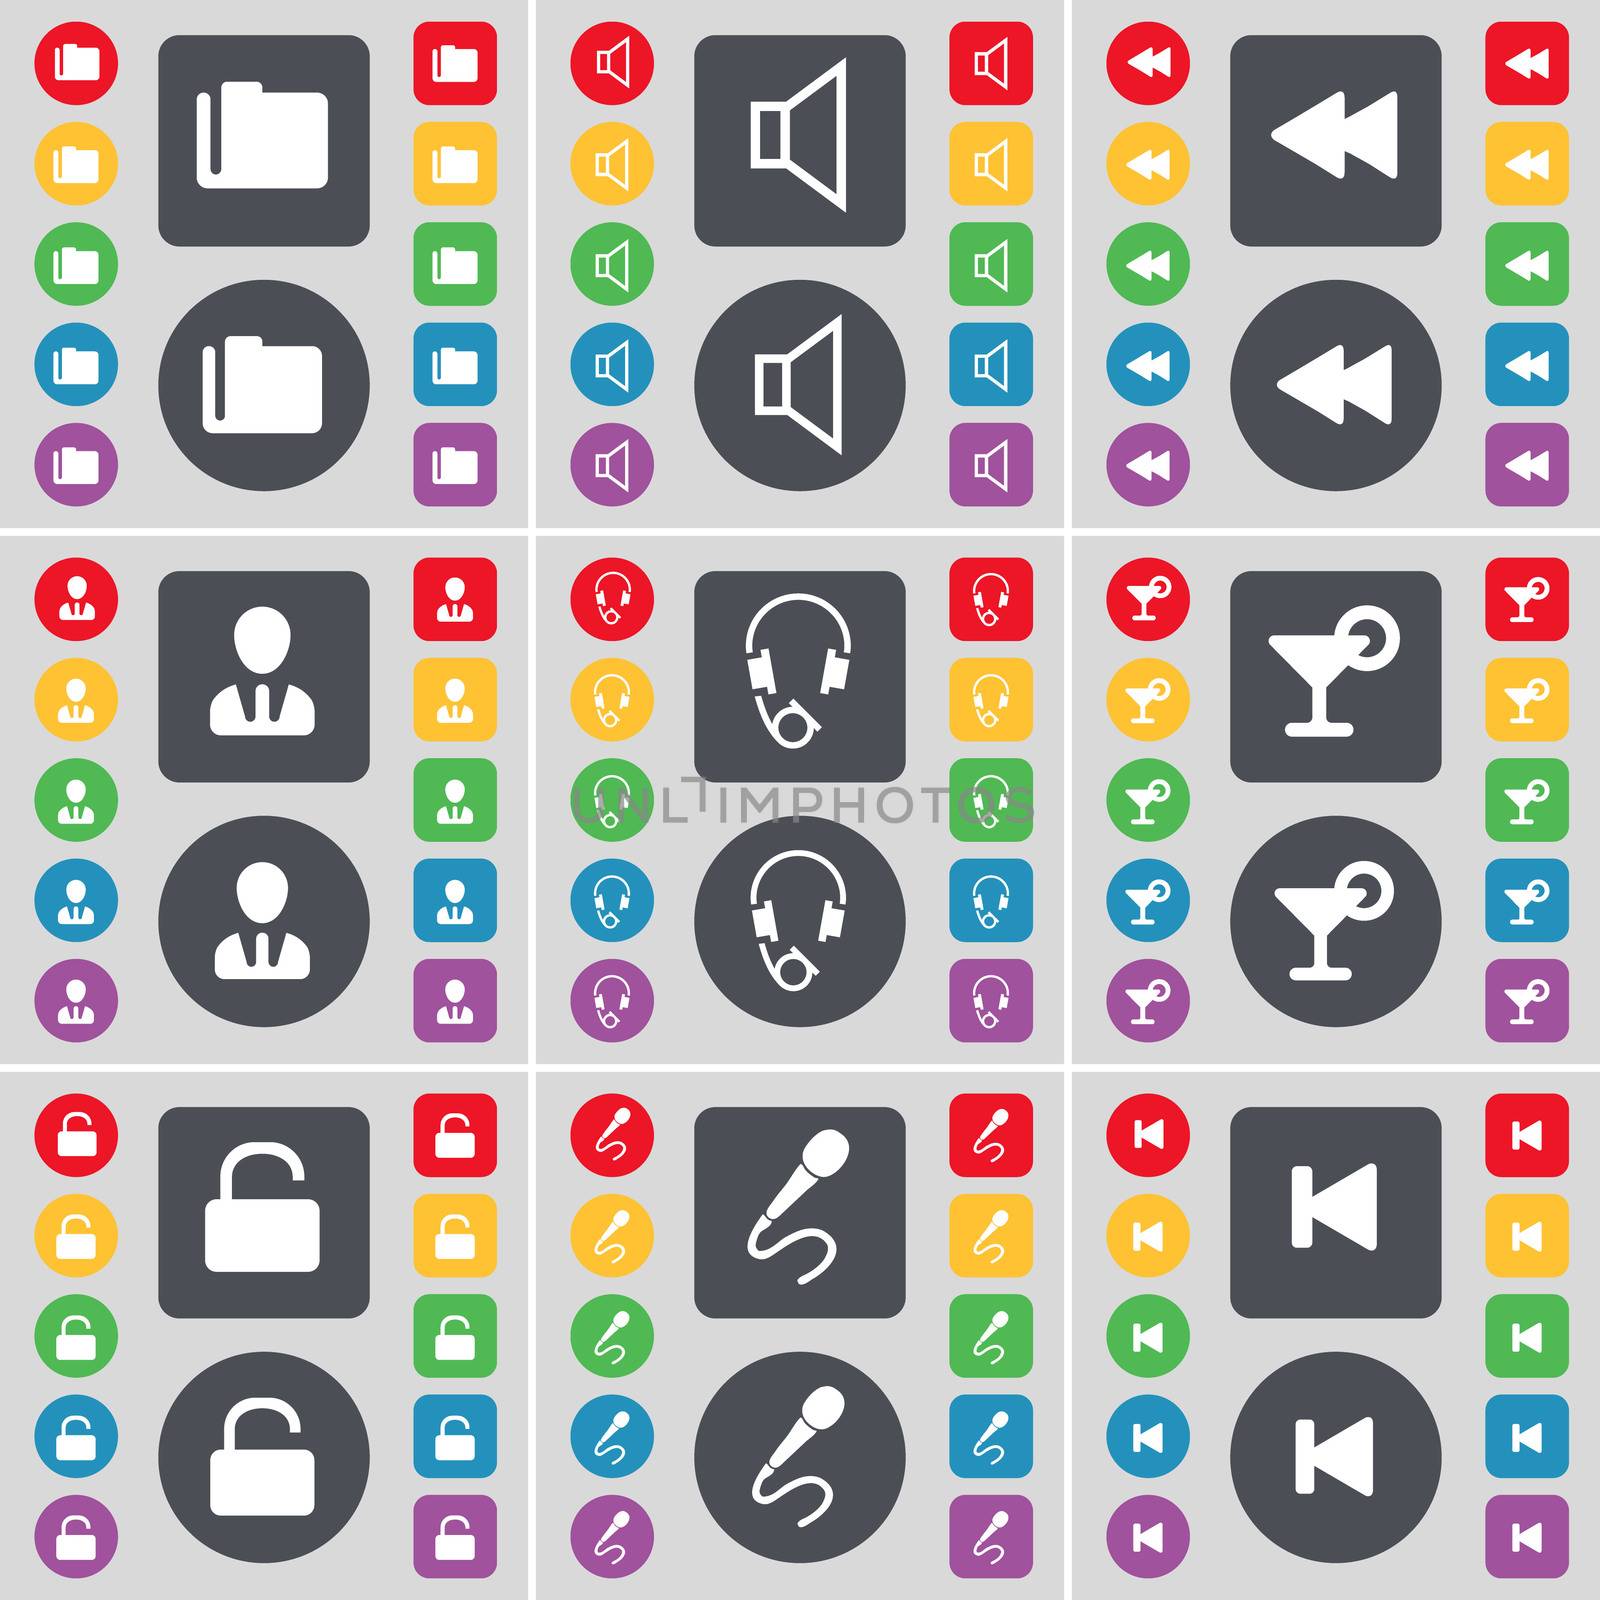 Folder, Sound, Rewind, Avatar, Headphones, Cocktail, Lock, Microphone, Media skip icon symbol. A large set of flat, colored buttons for your design.  by serhii_lohvyniuk